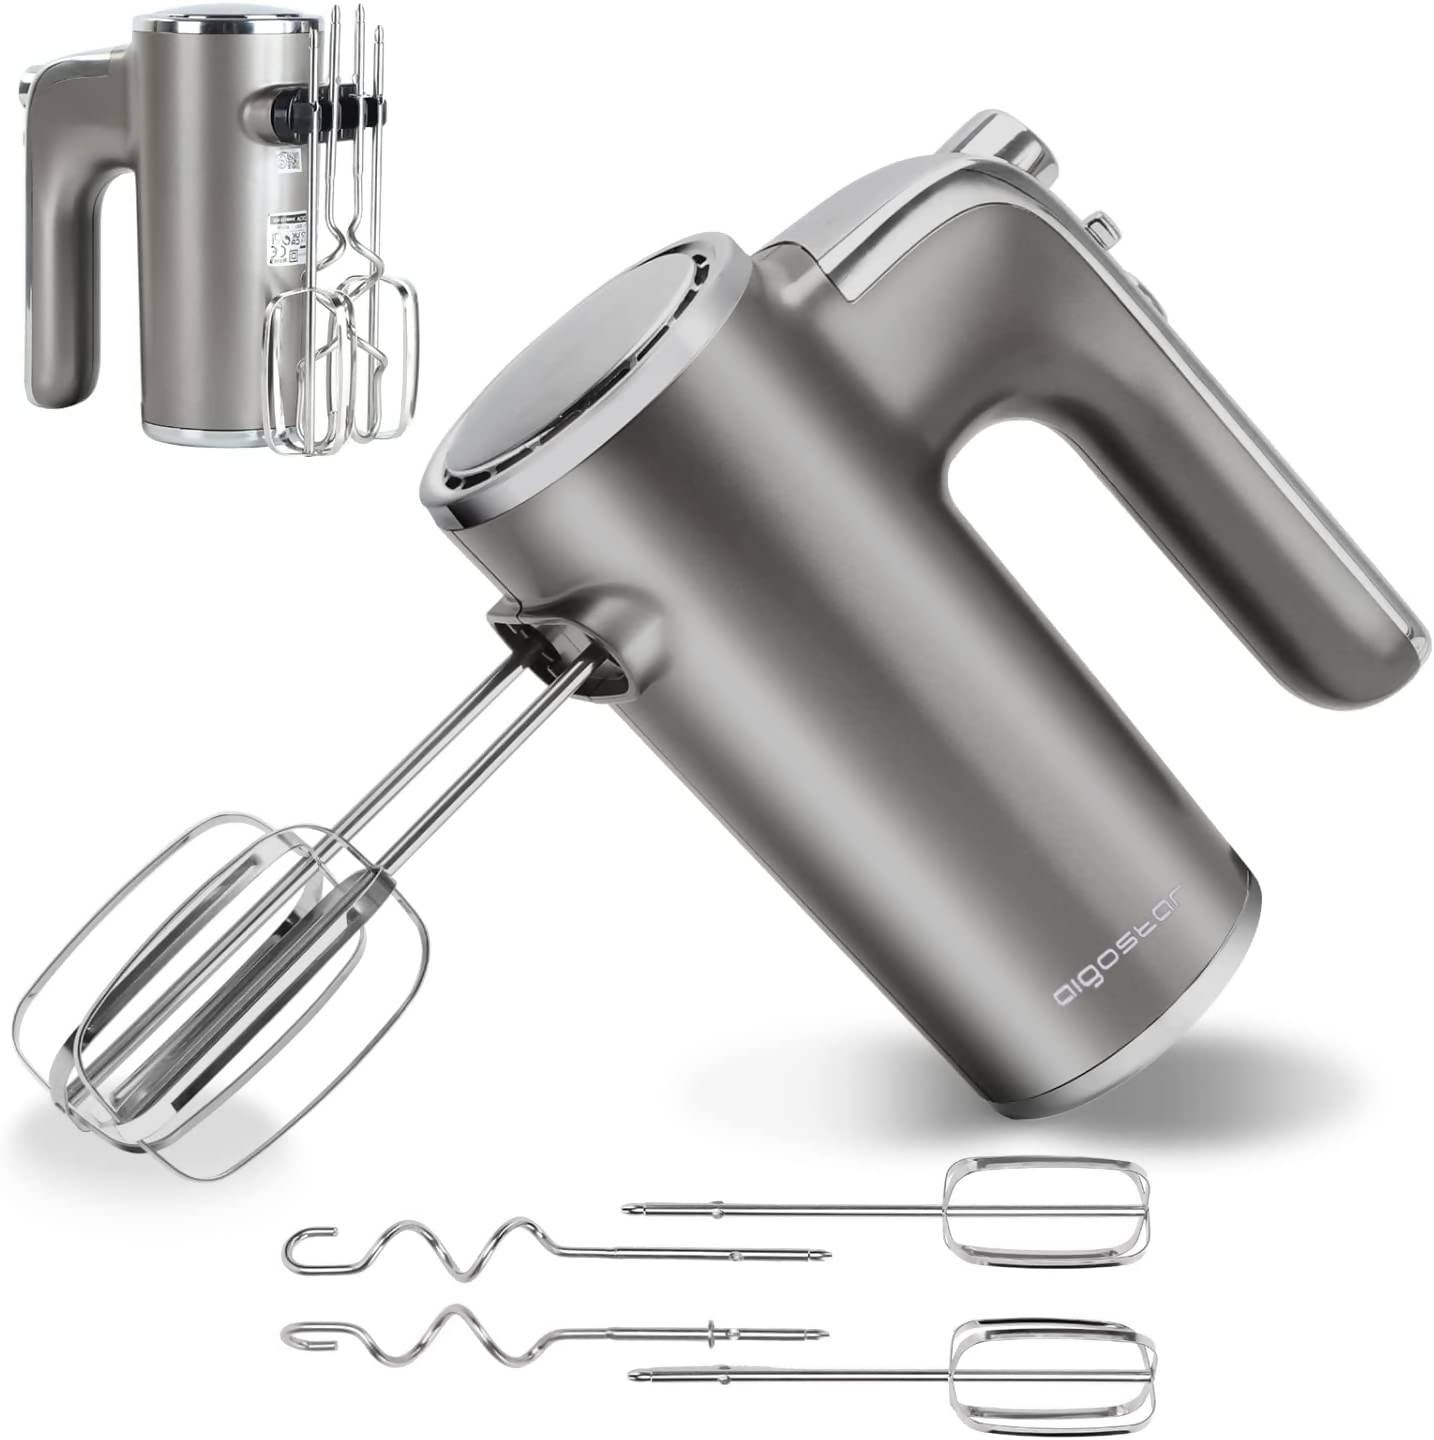 Aigostar Adela Hand Mixer 400W Ultra Power Mixer Hand Stirrer with 1 Storage Holder, 5 Speeds, Turbo Boost, 2 Whisk and 2 Dough Hooks, for Eggs, Dough, Cakes, etc. Silver Grey